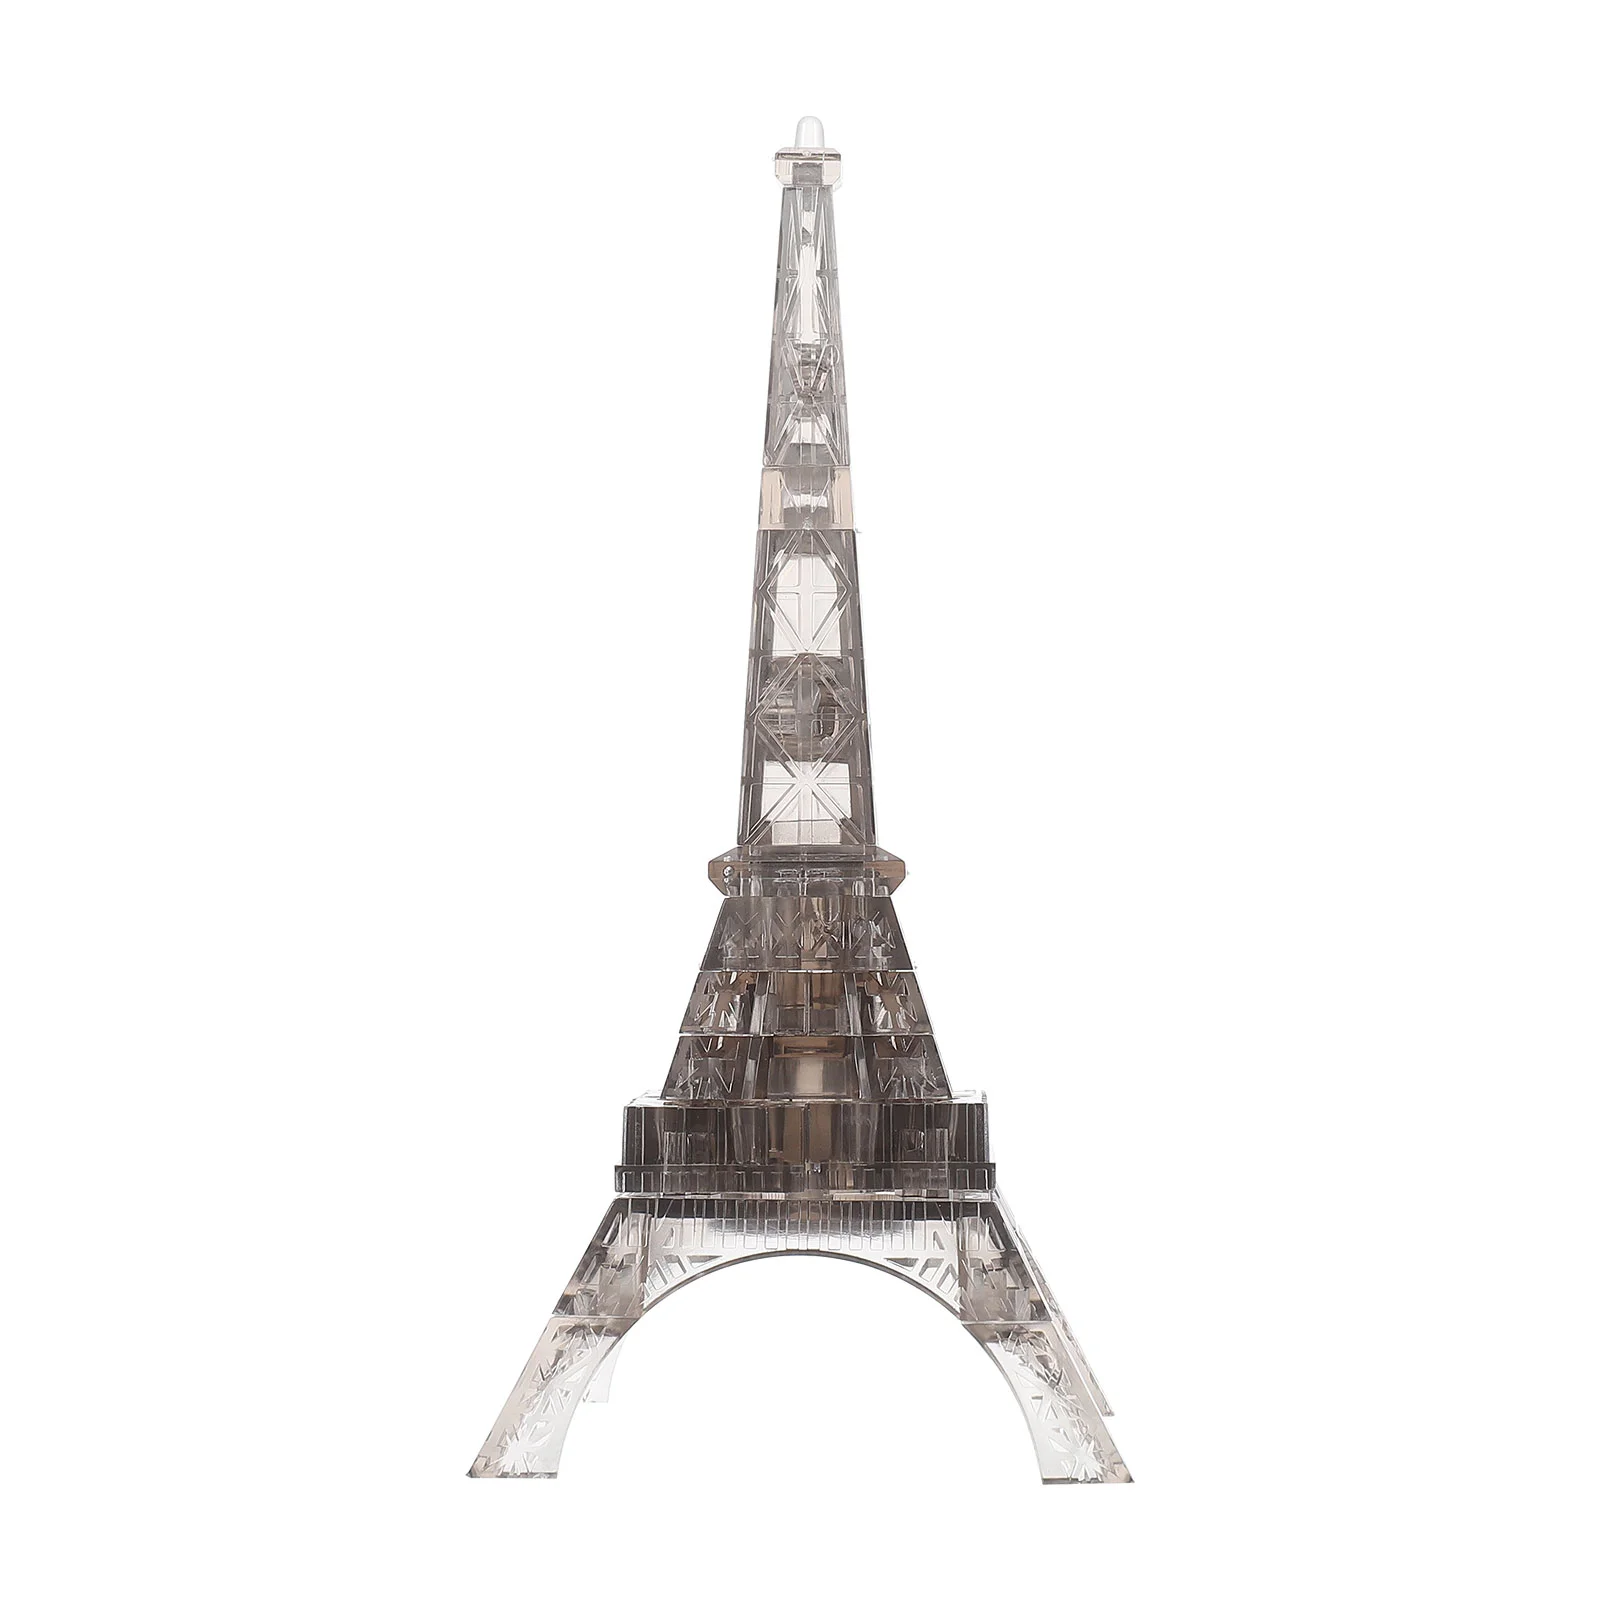 3D Transparent Eiffel Tower Puzzle Crystal Jigsaw Pieces Building Blocks Brain Teaser Educational Early Learning, Grey xiaomi building blocks scorpio defenses tower jupiter dawn series sci fi kids puzzle toy